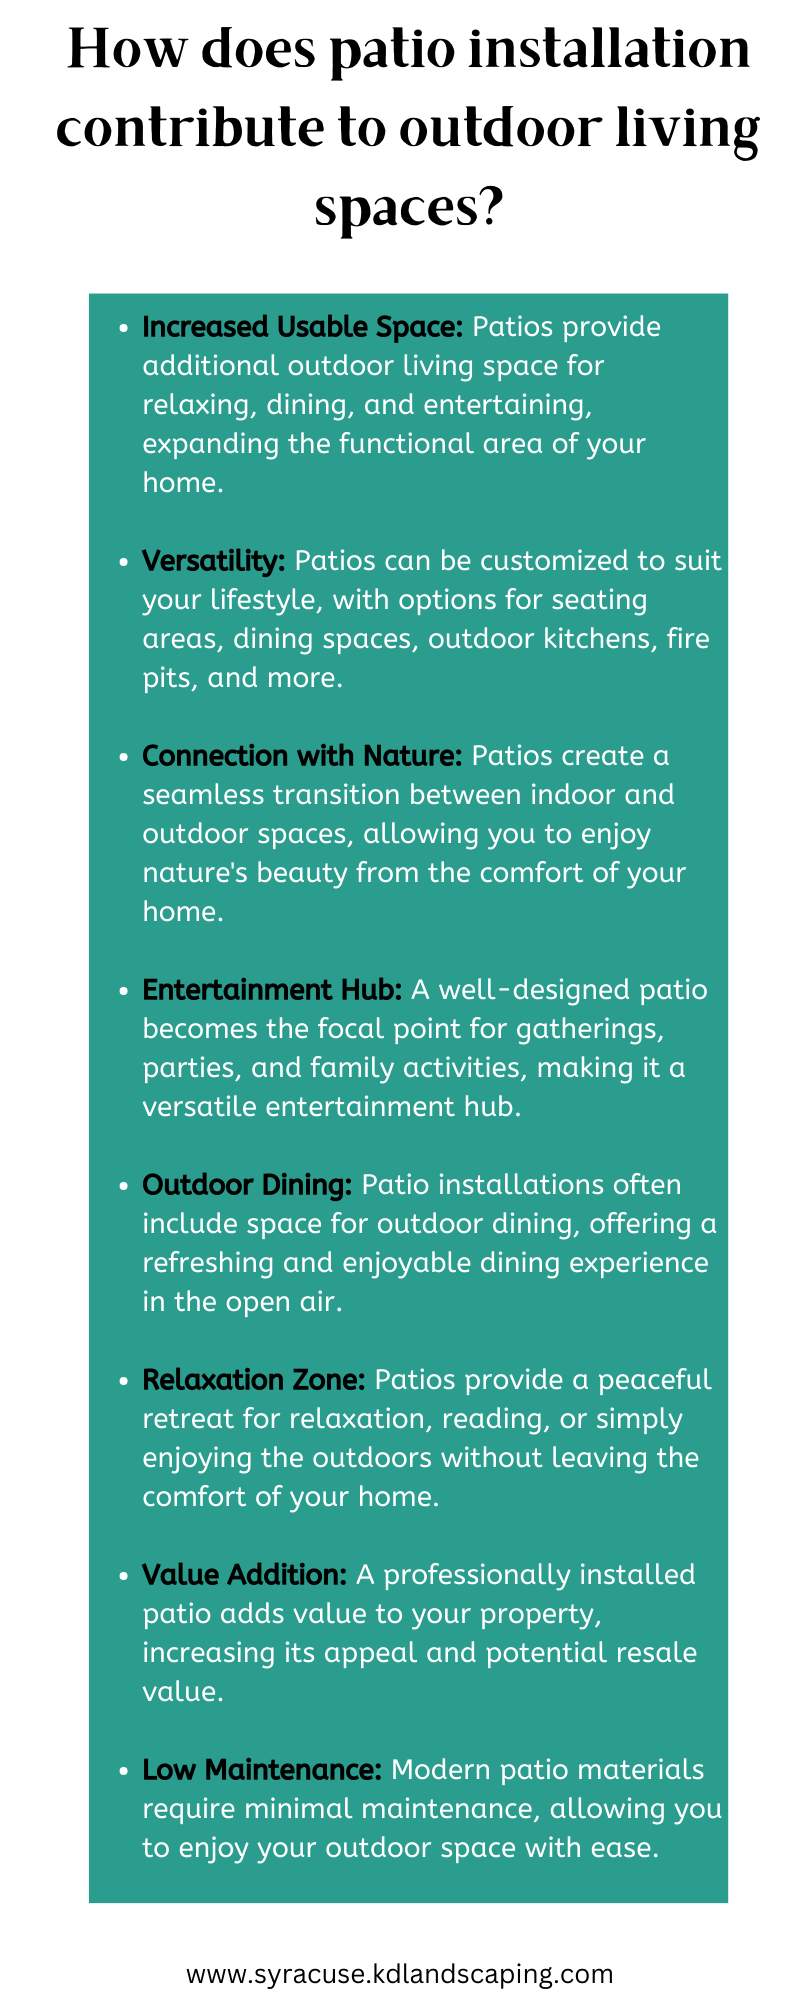 How does patio installation contribute to outdoor living spaces? - Social Social Social | Social Social Social